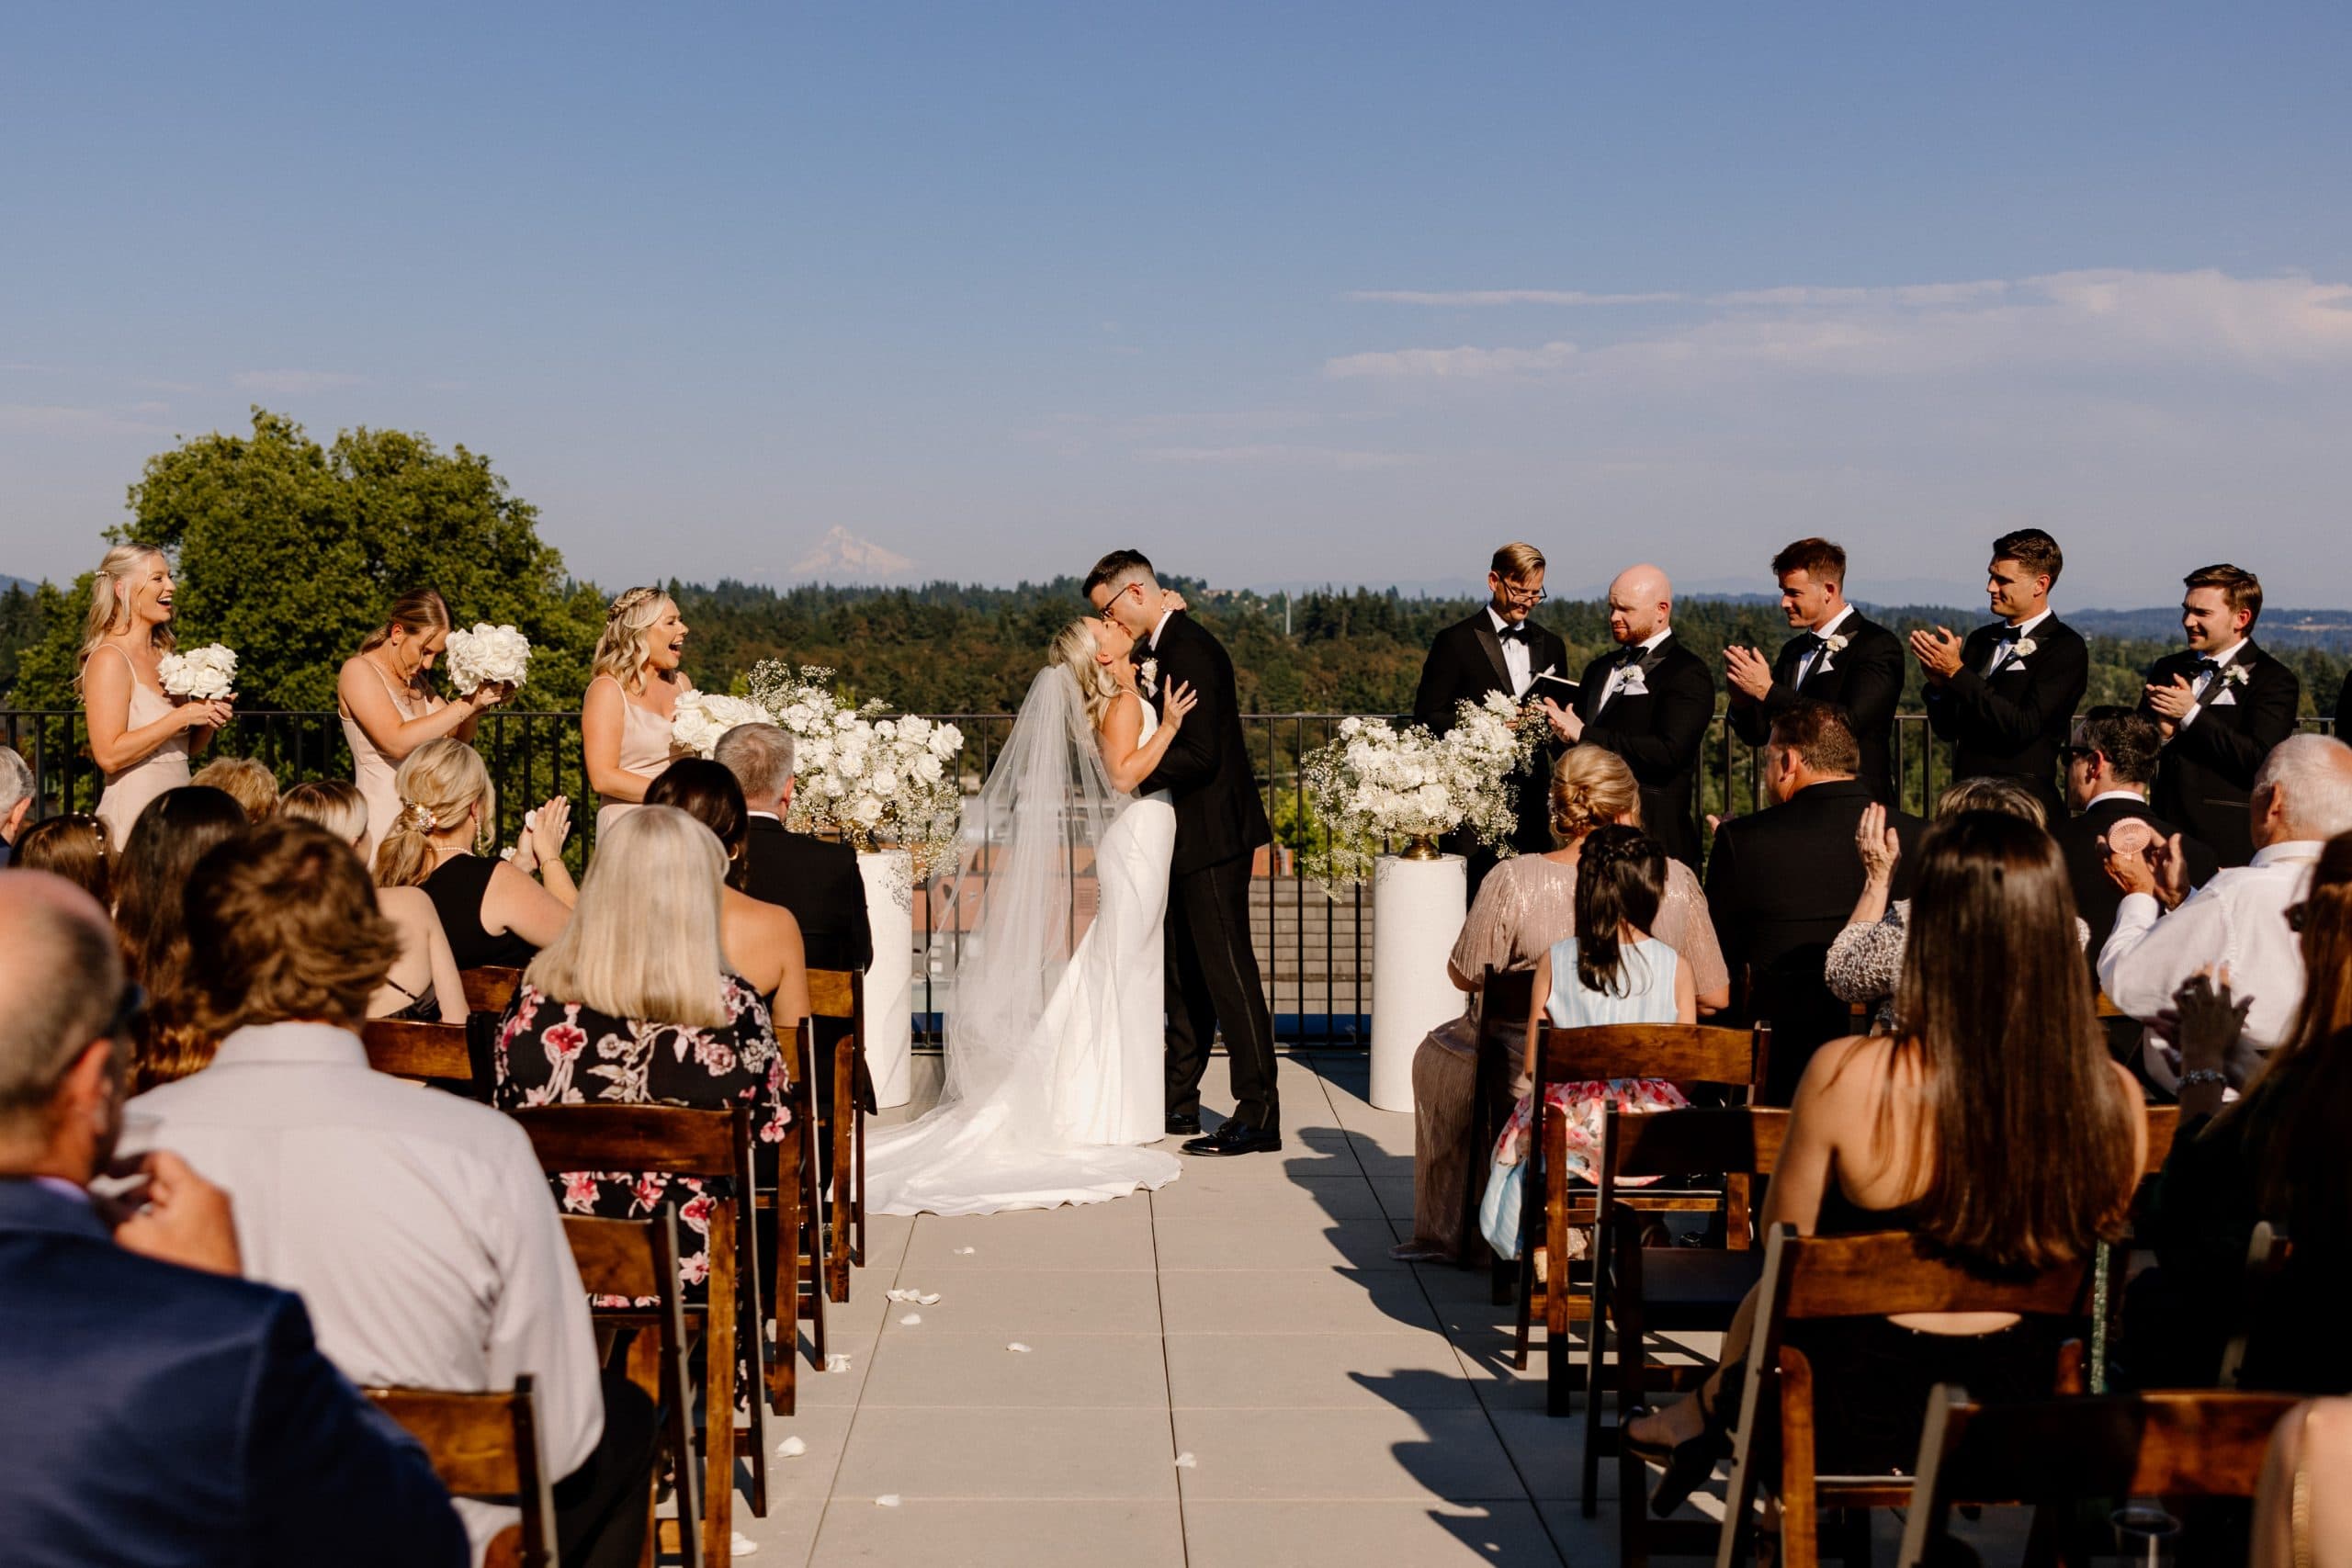 A bride and groom's first kiss at their Ironlight Lake Oswego wedding ceremony.